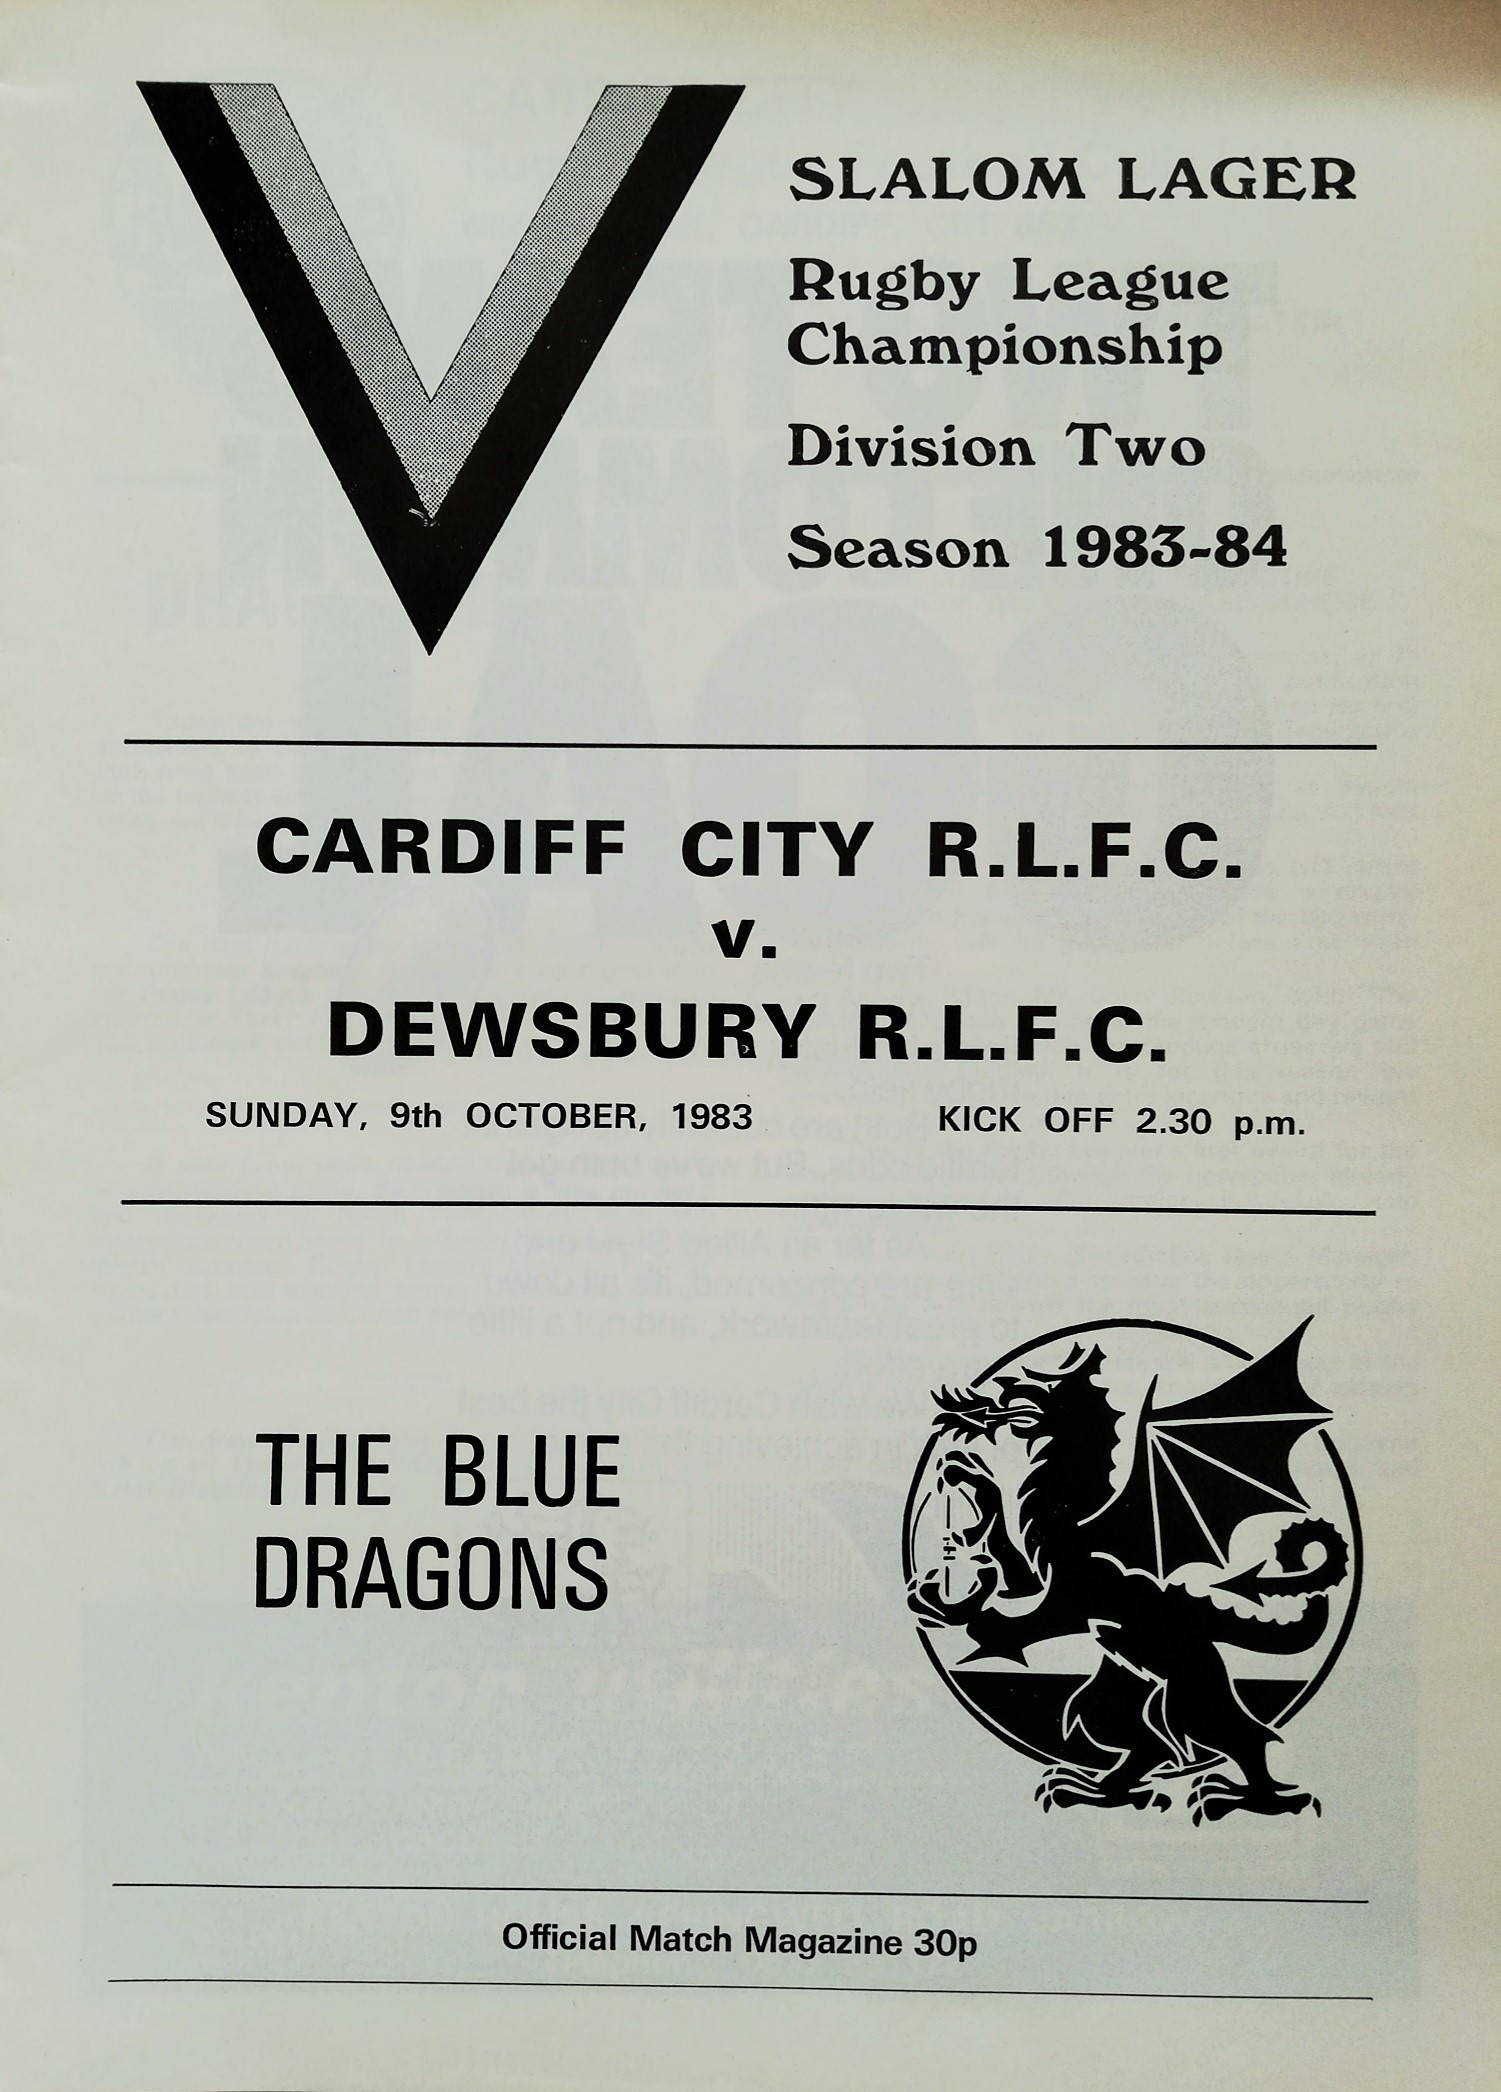 cardiff-city-rugby-league-programmes